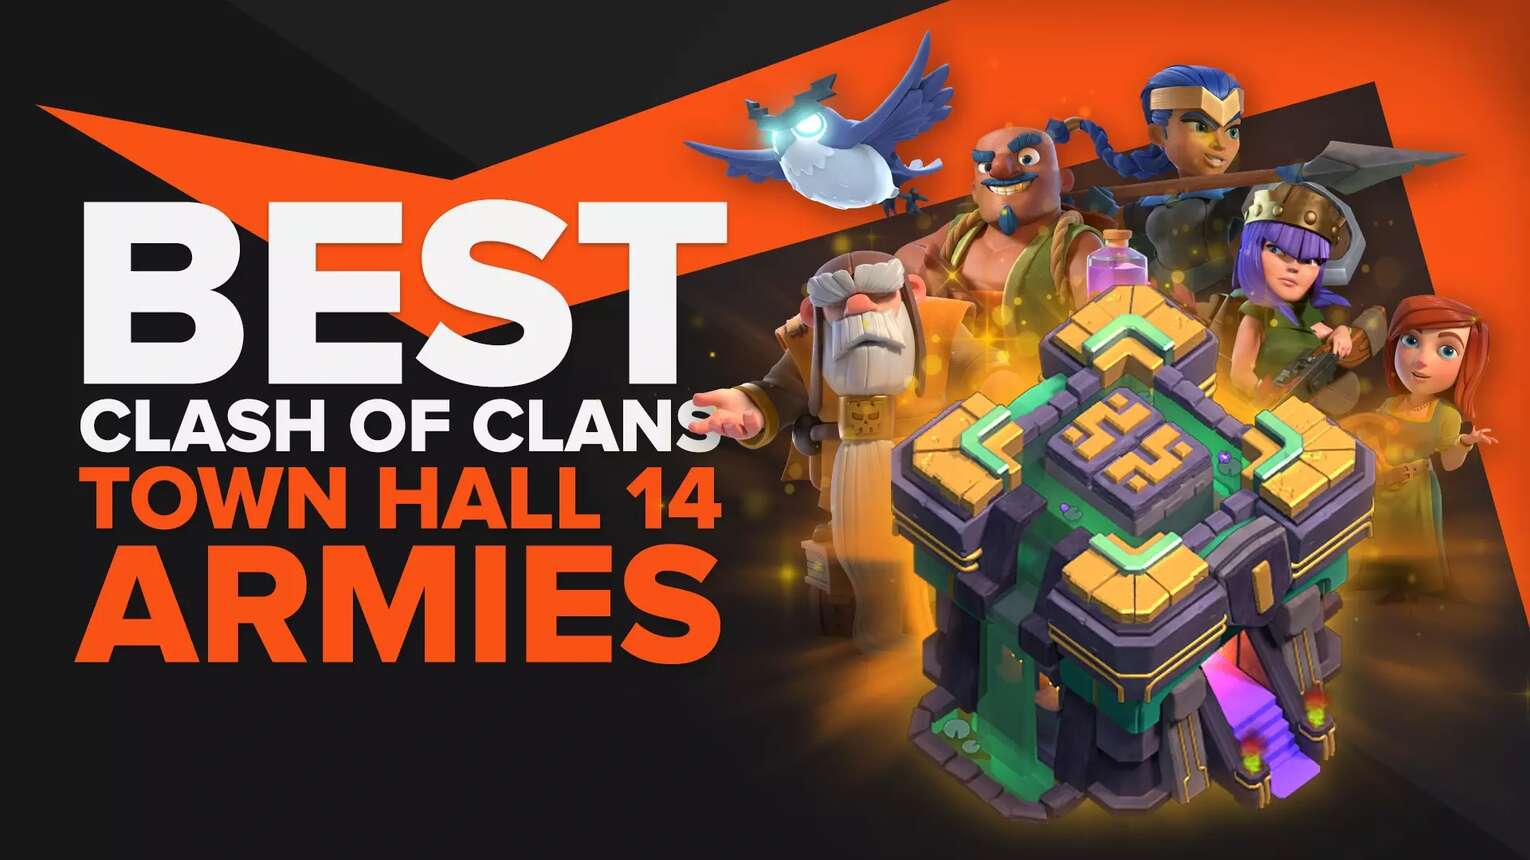 What Is The Best Army In Clash of Clans For Town Hall 14?